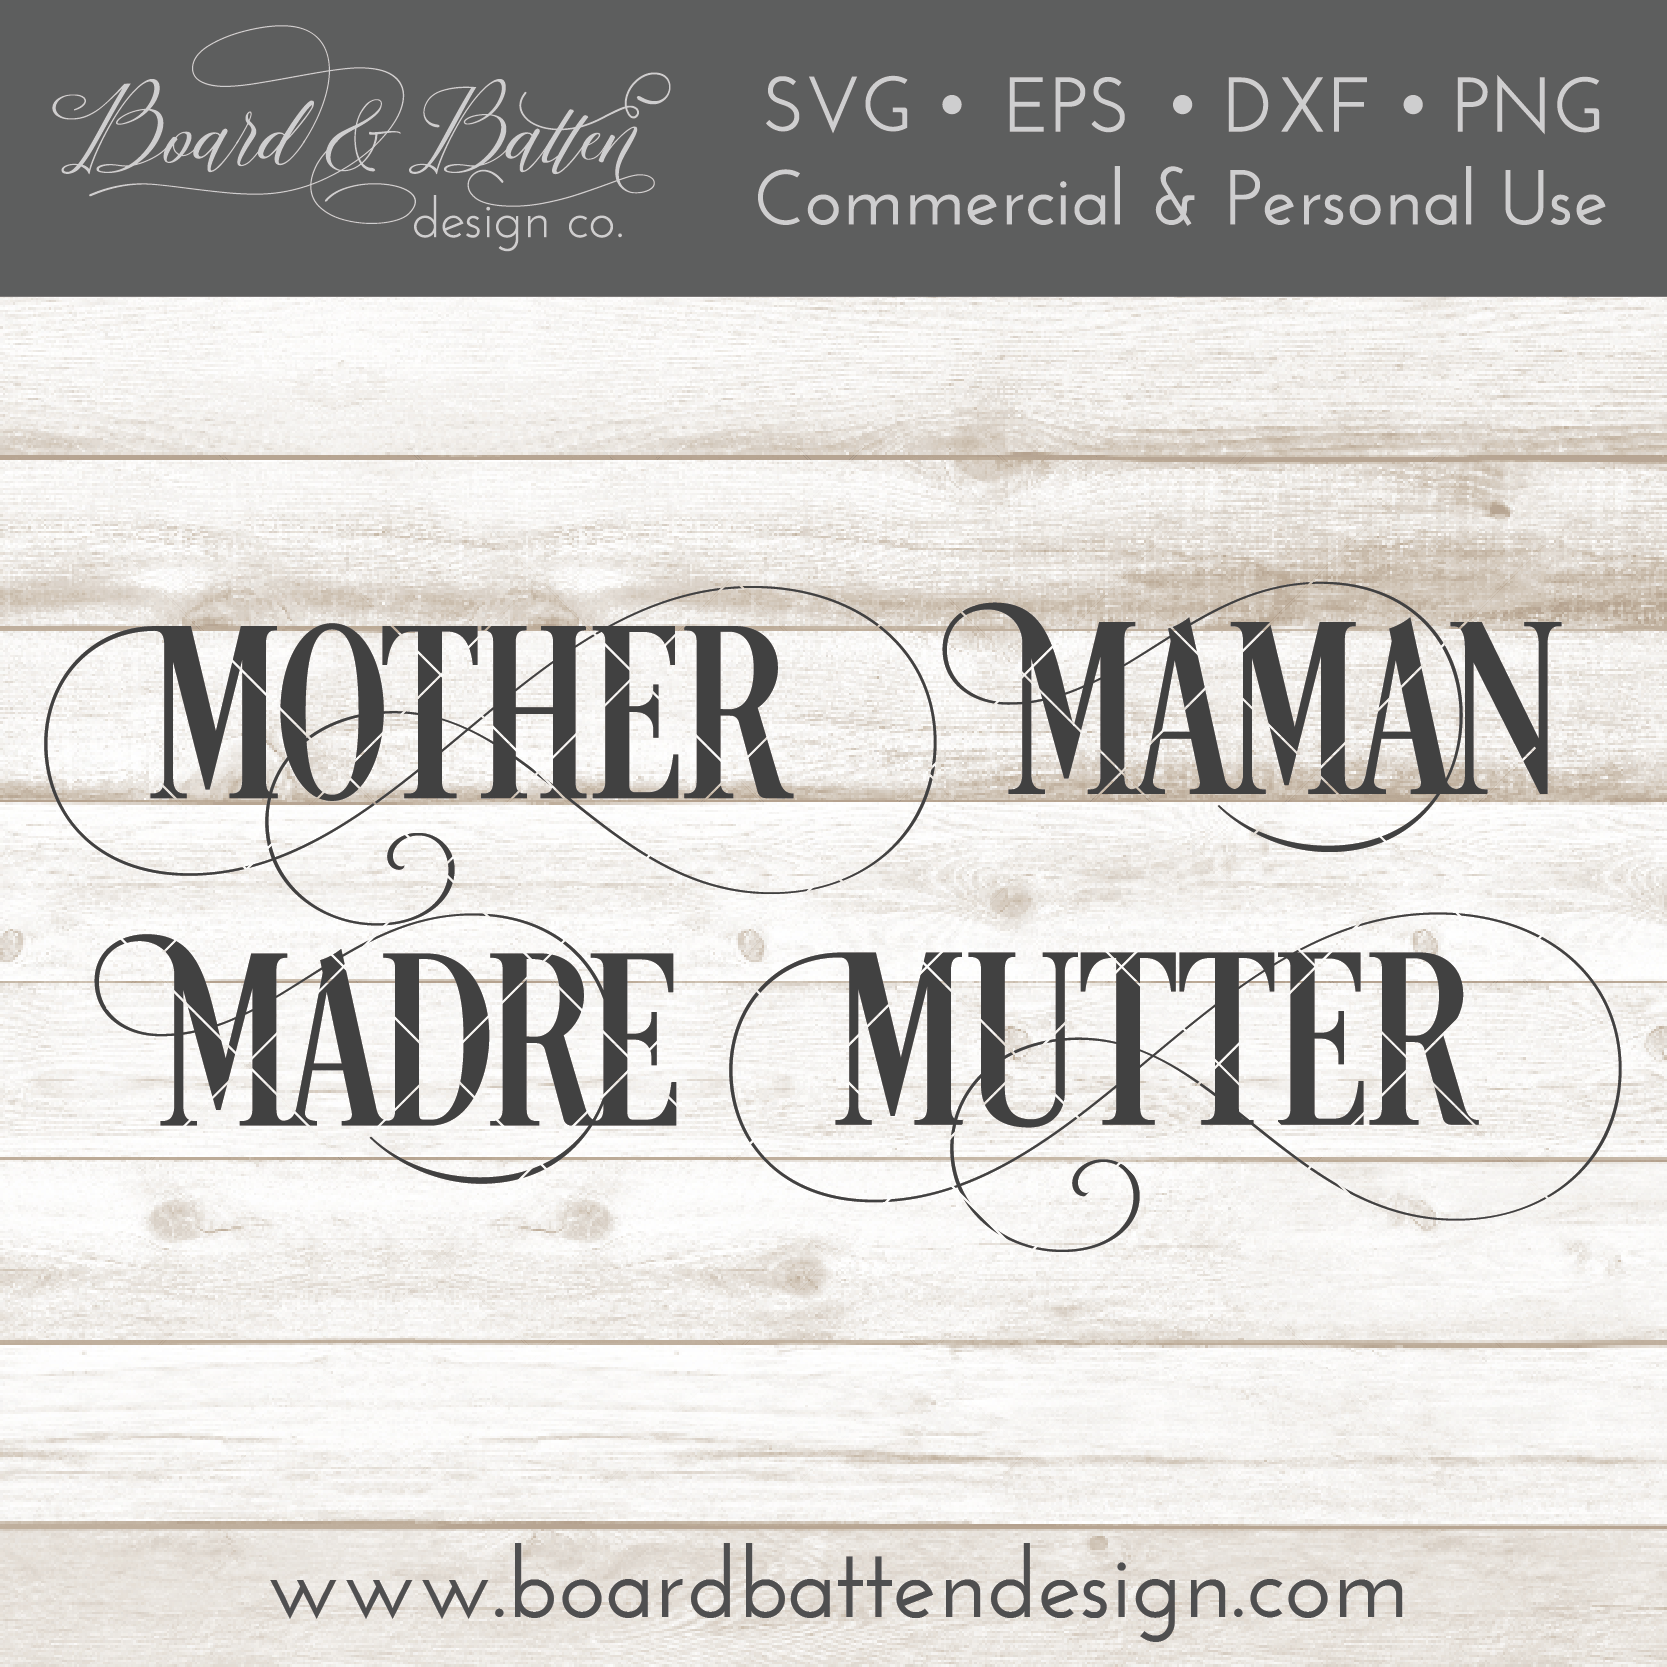 Mother Madre Maman Mutter SVG File - Commercial Use SVG Files for Cricut & Silhouette